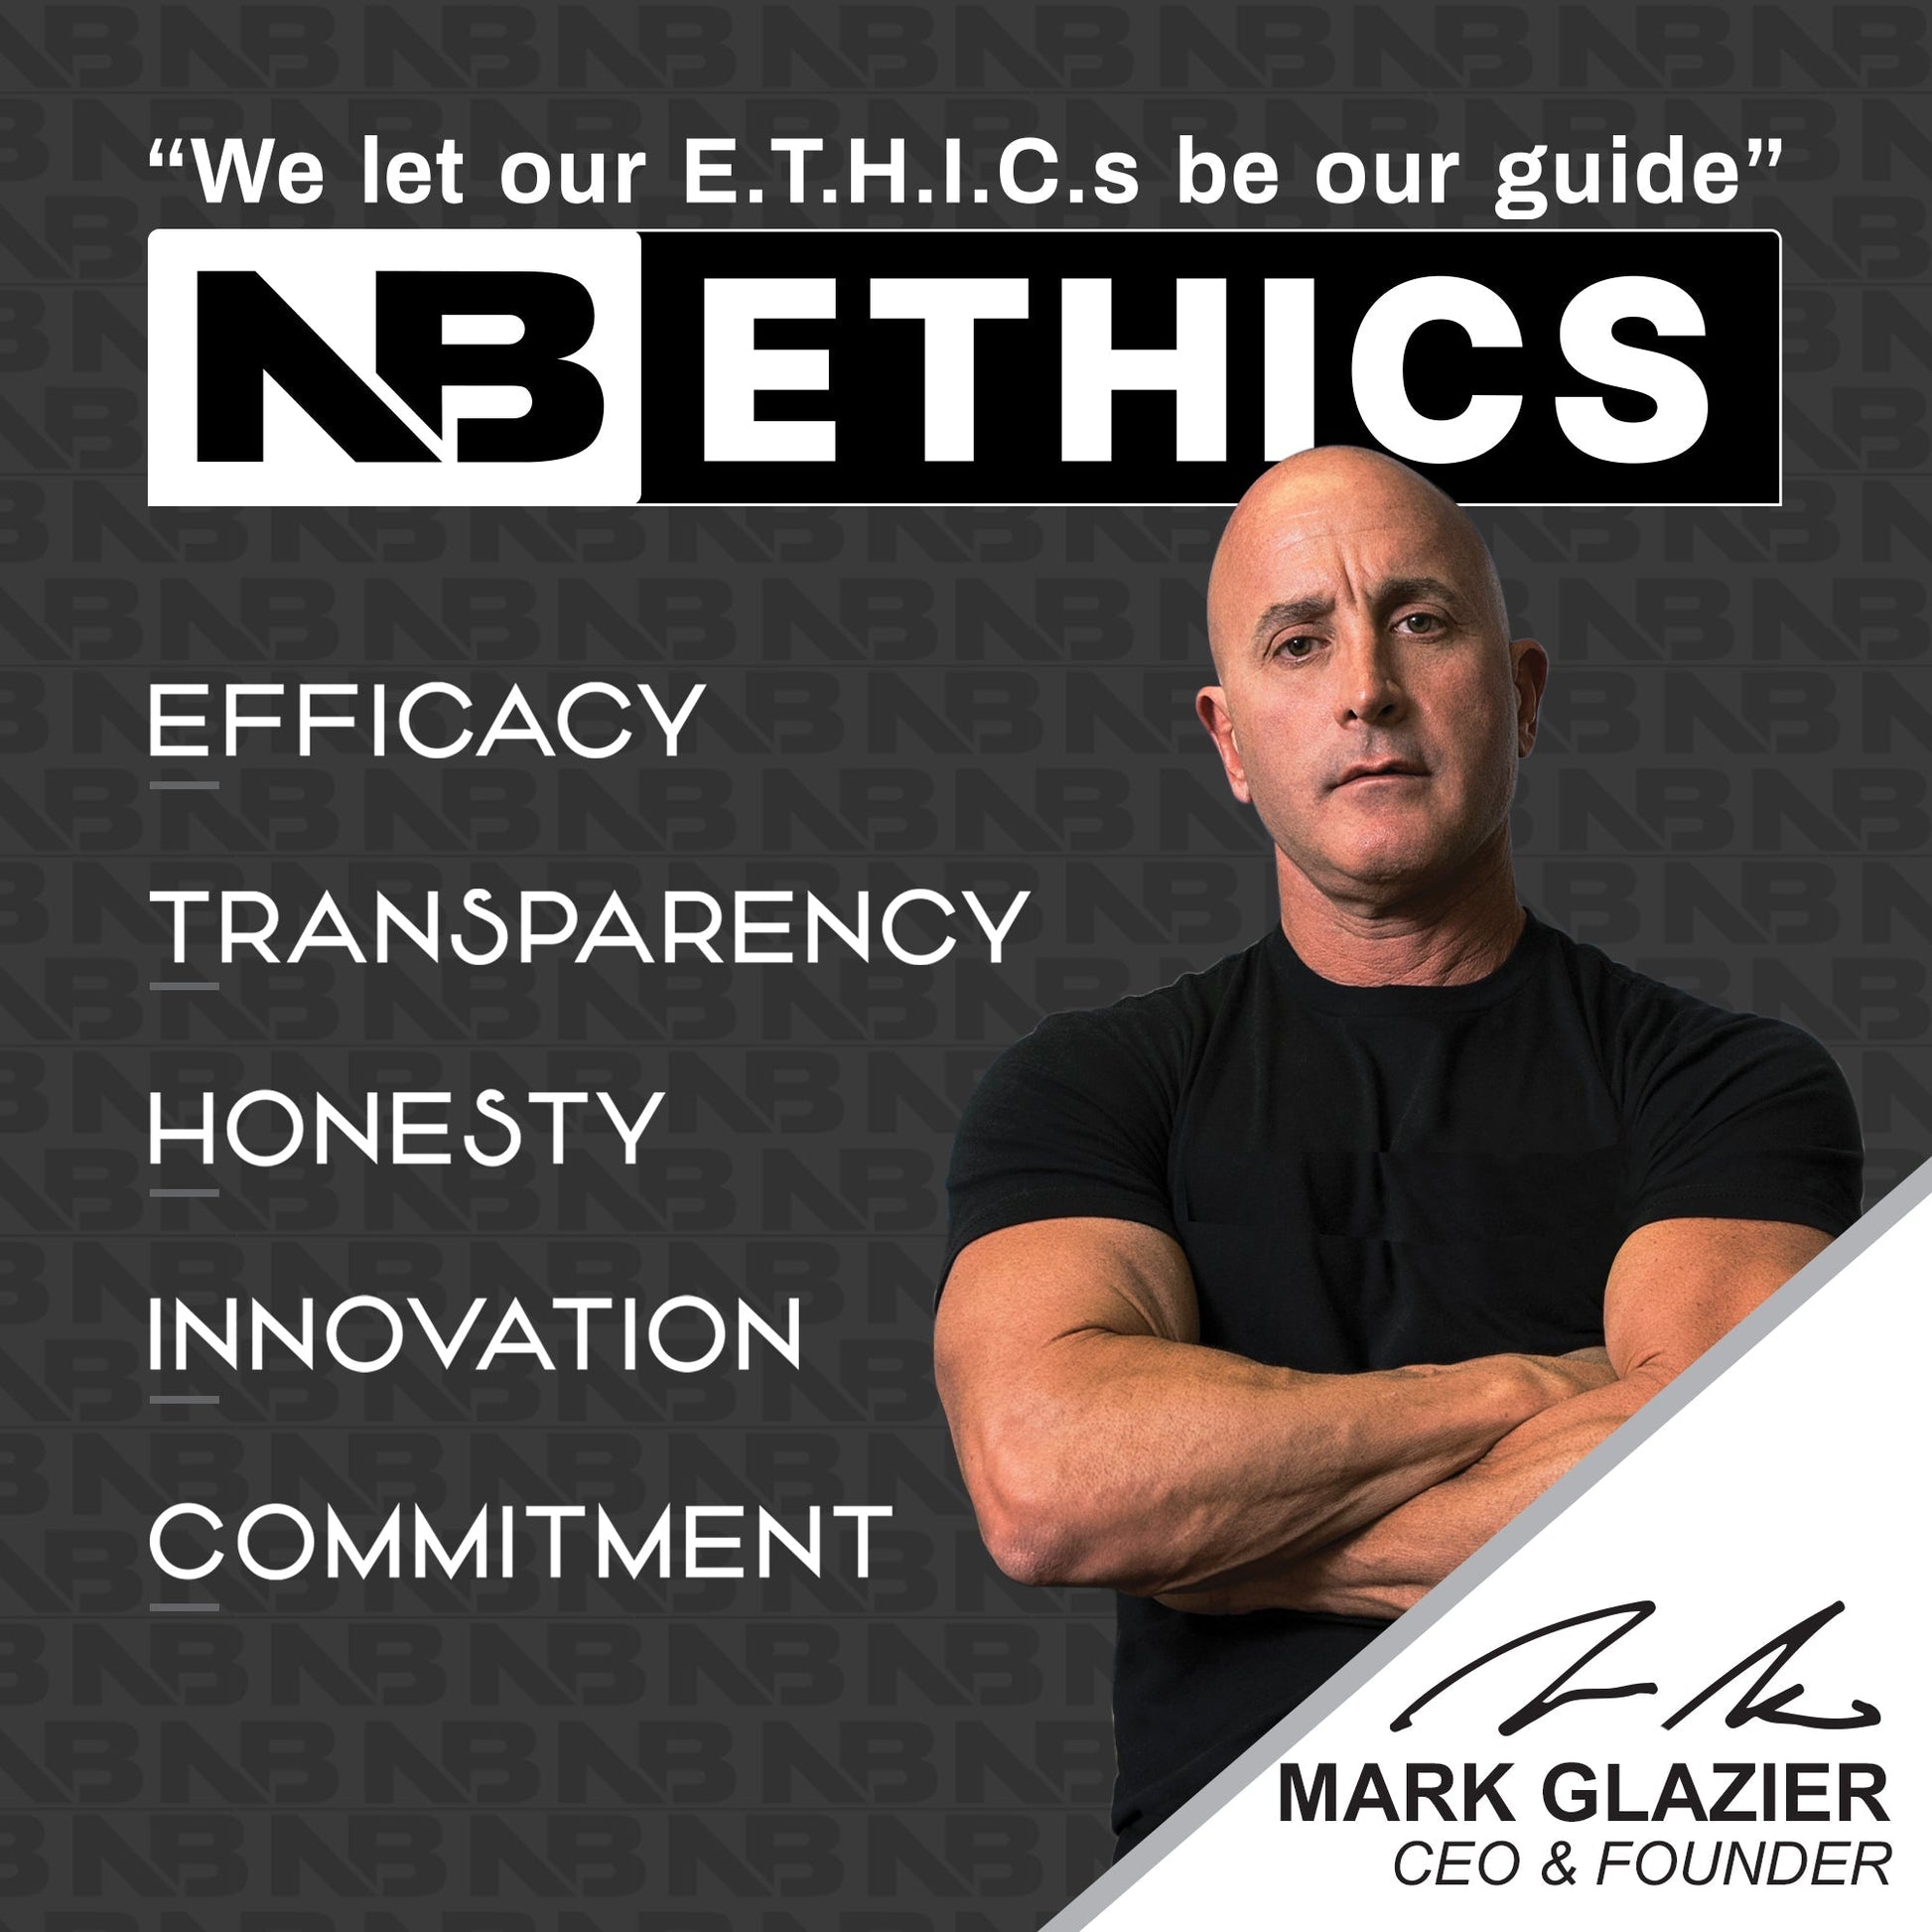 Mark Glazier, CEO and Founder